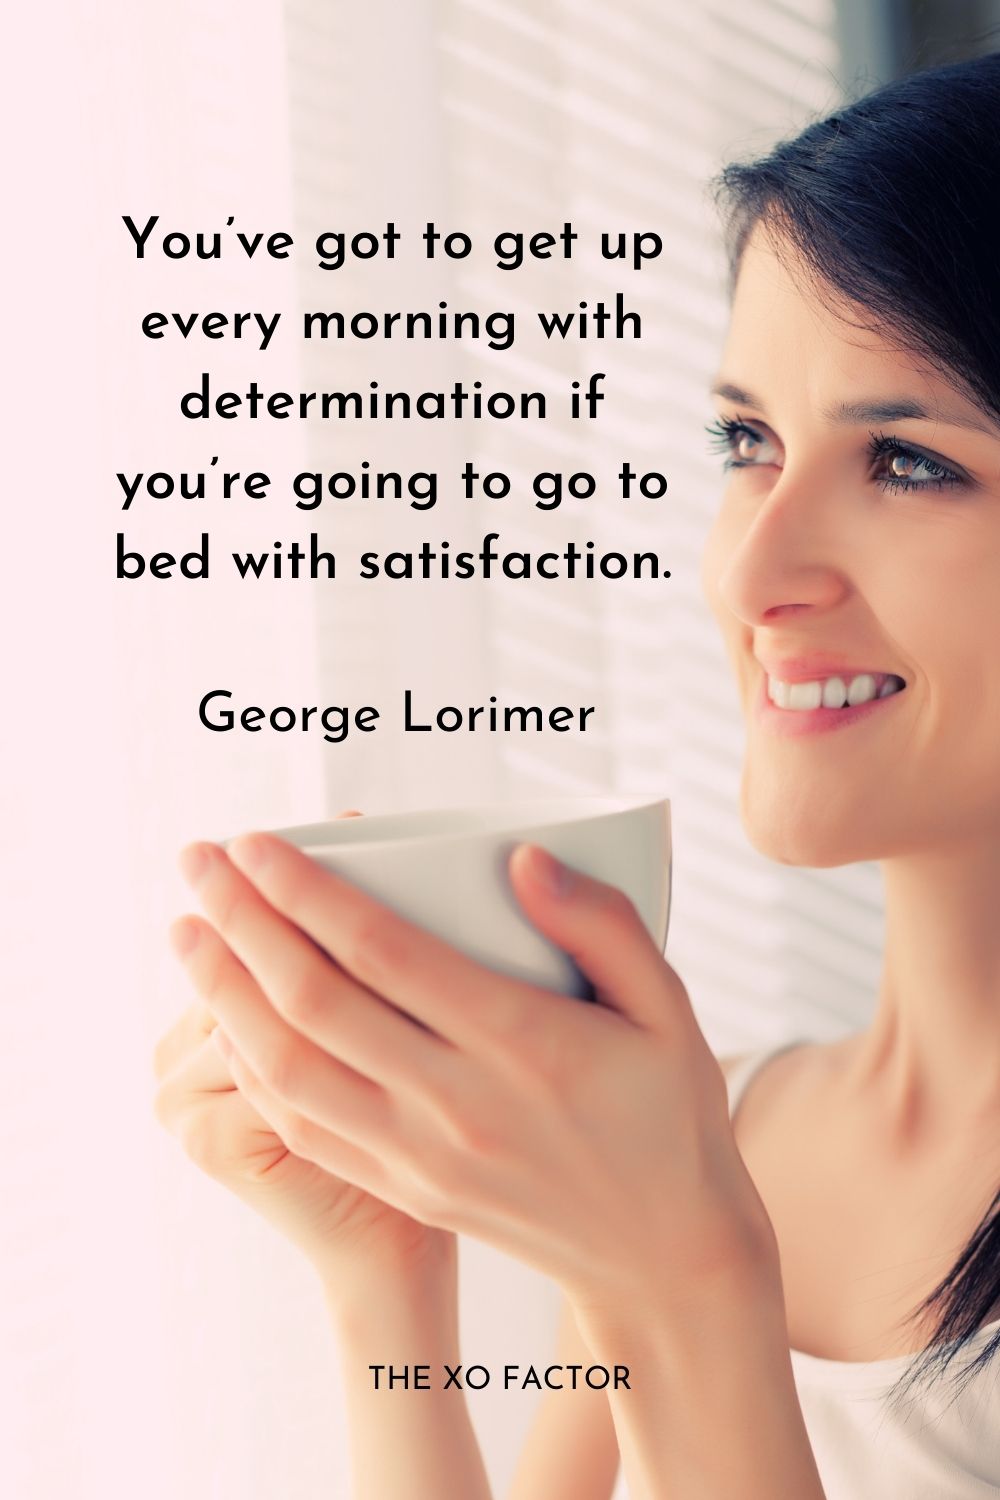 You’ve got to get up every morning with determination if you’re going to go to bed with satisfaction.